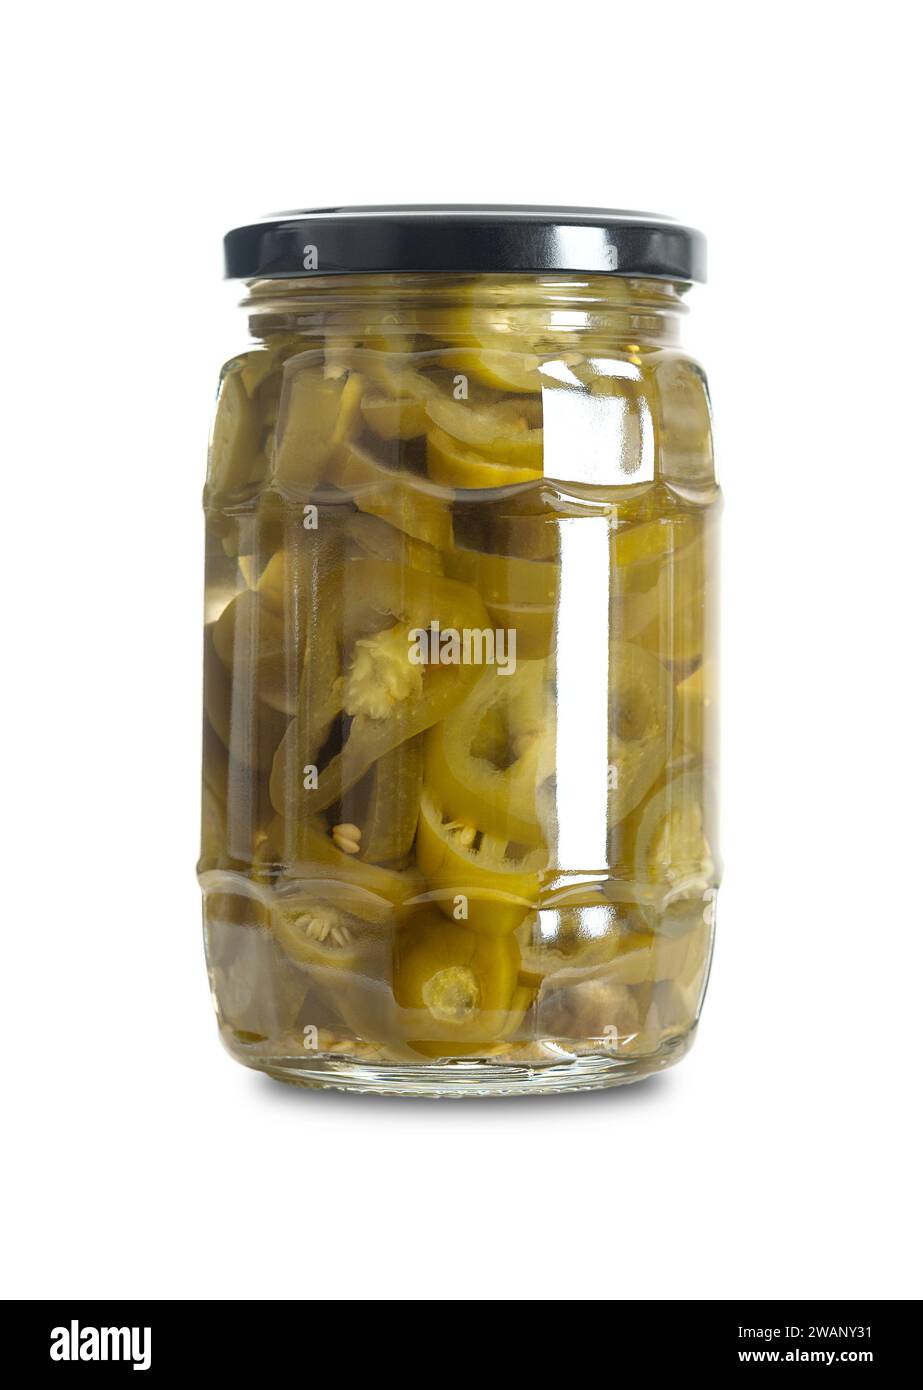 Jalapeno slices, pickled in a glass jar. Medium-sized hot, green chili peppers, cut into cross sections, pasteurized and preserved in a brine. Stock Photo